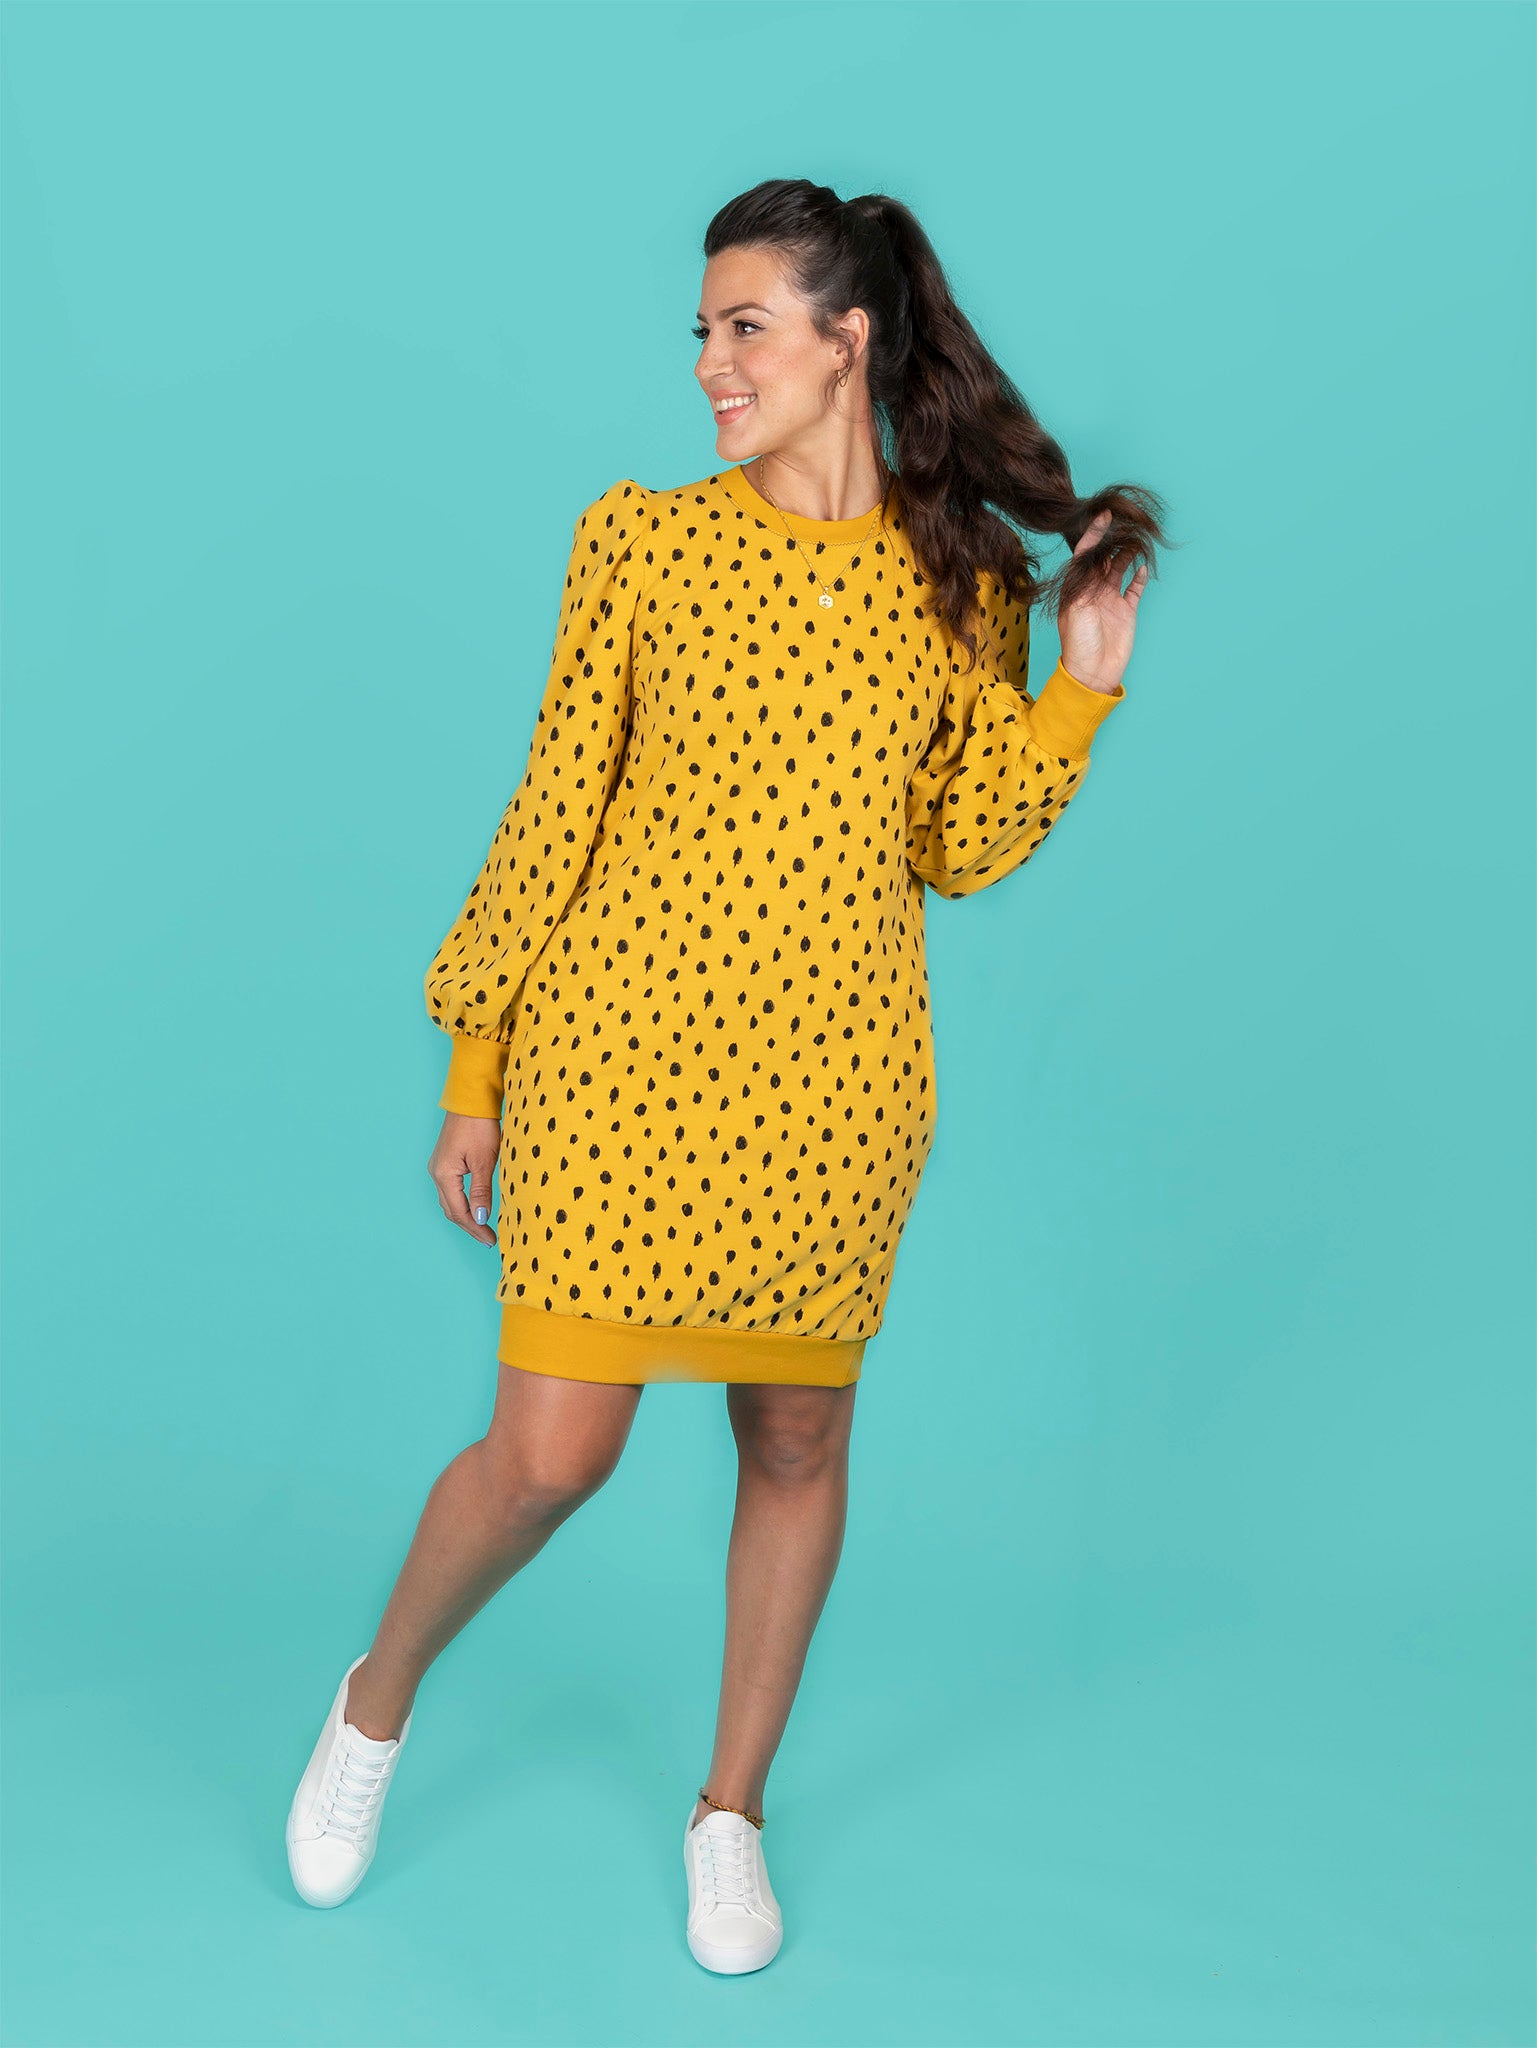 Tilly and the Buttons - Billie Sweatshirt and Dress Sewing Pattern